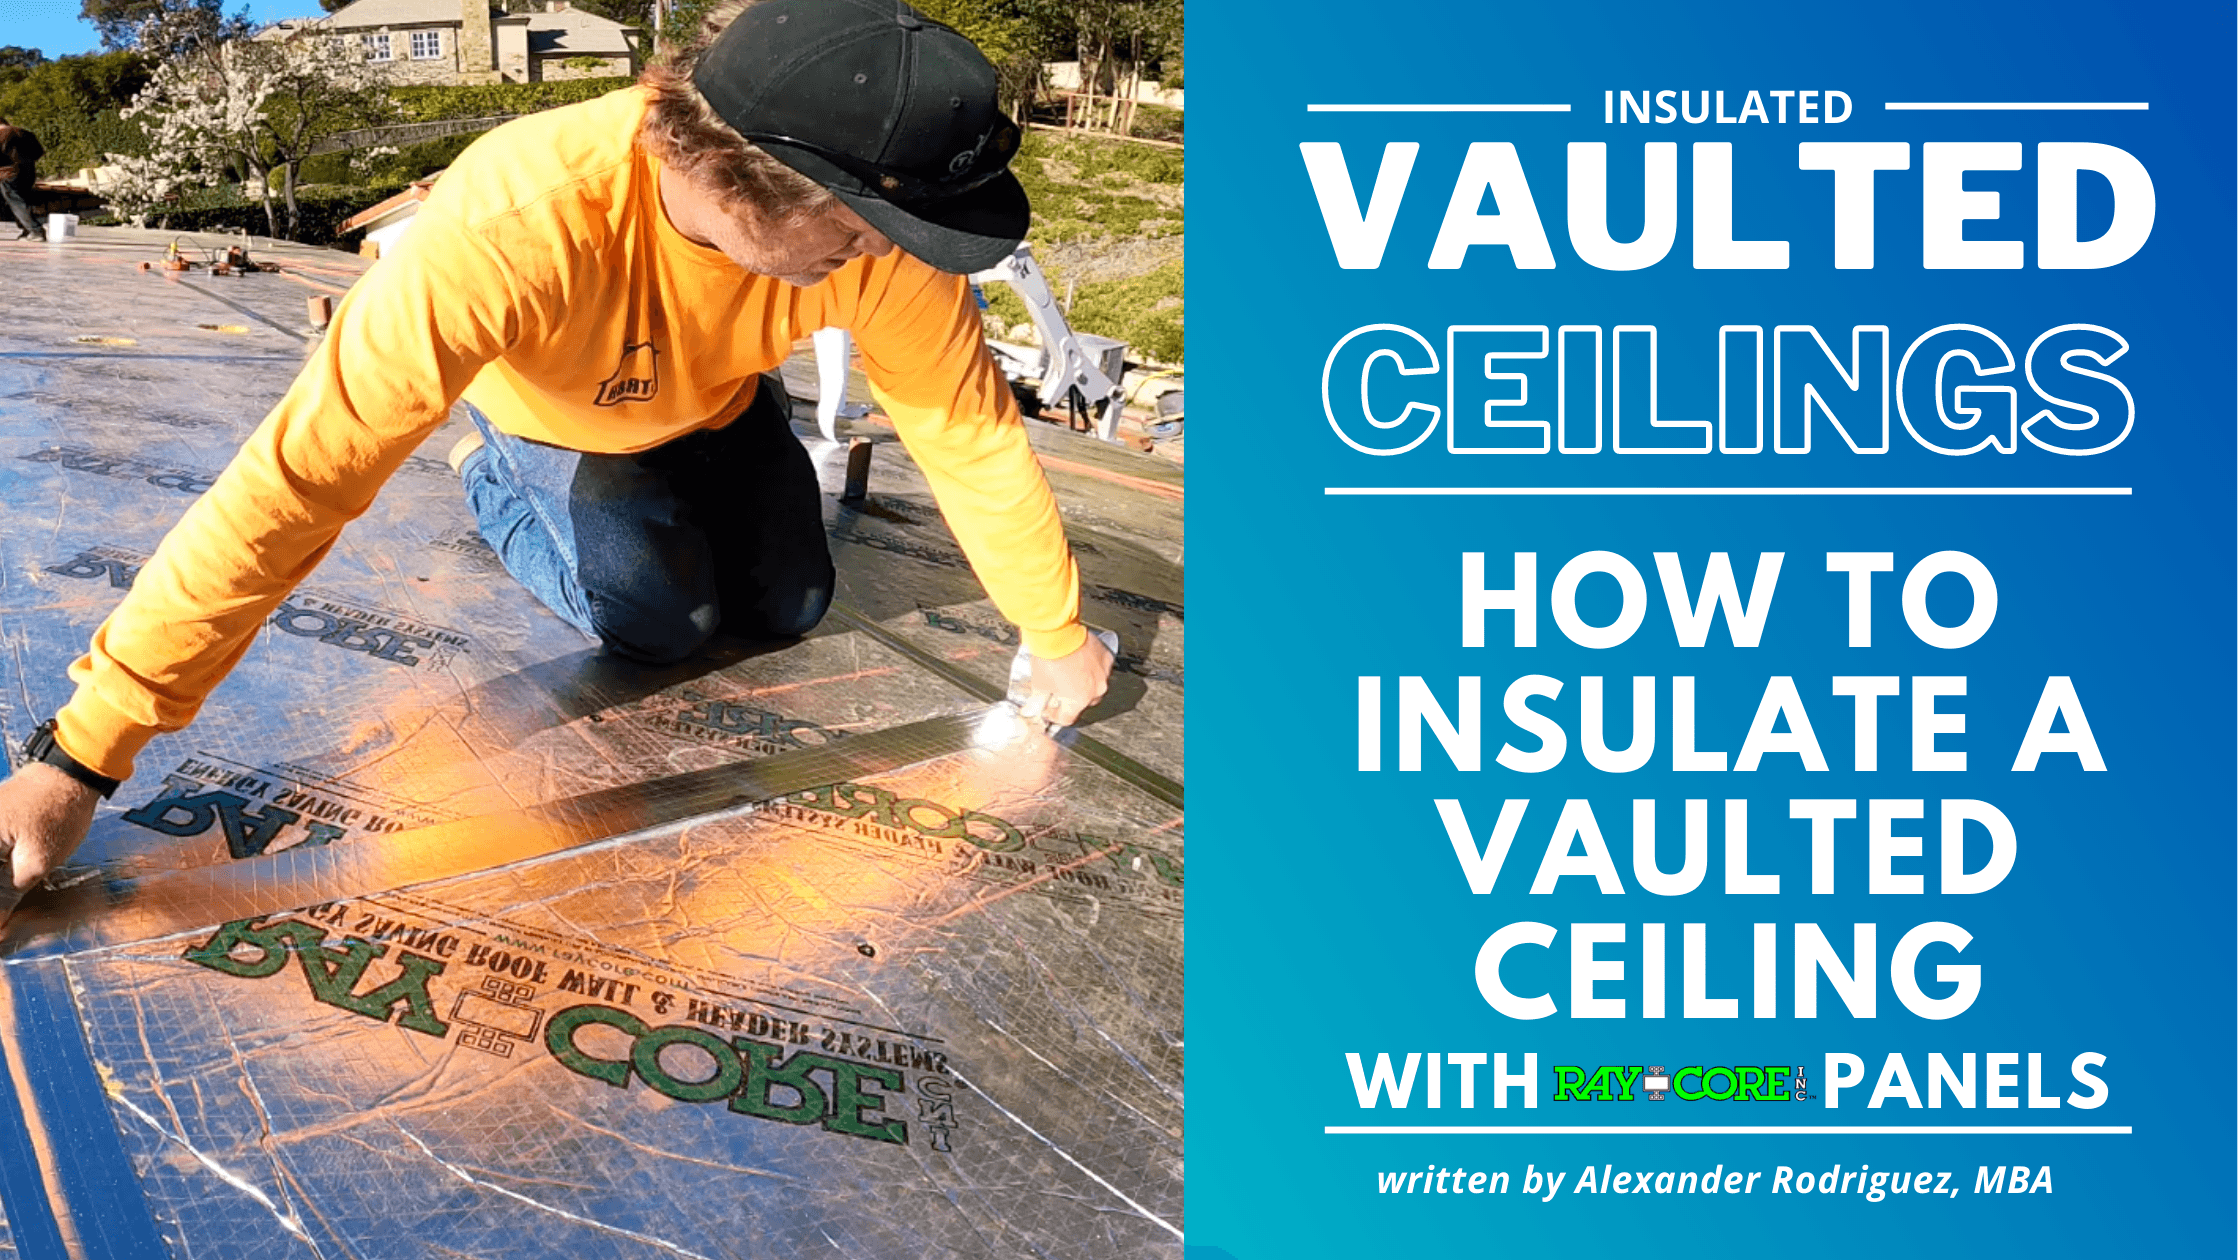 What is the Best Way to Insulate a Vaulted or Cathedral Ceilings?